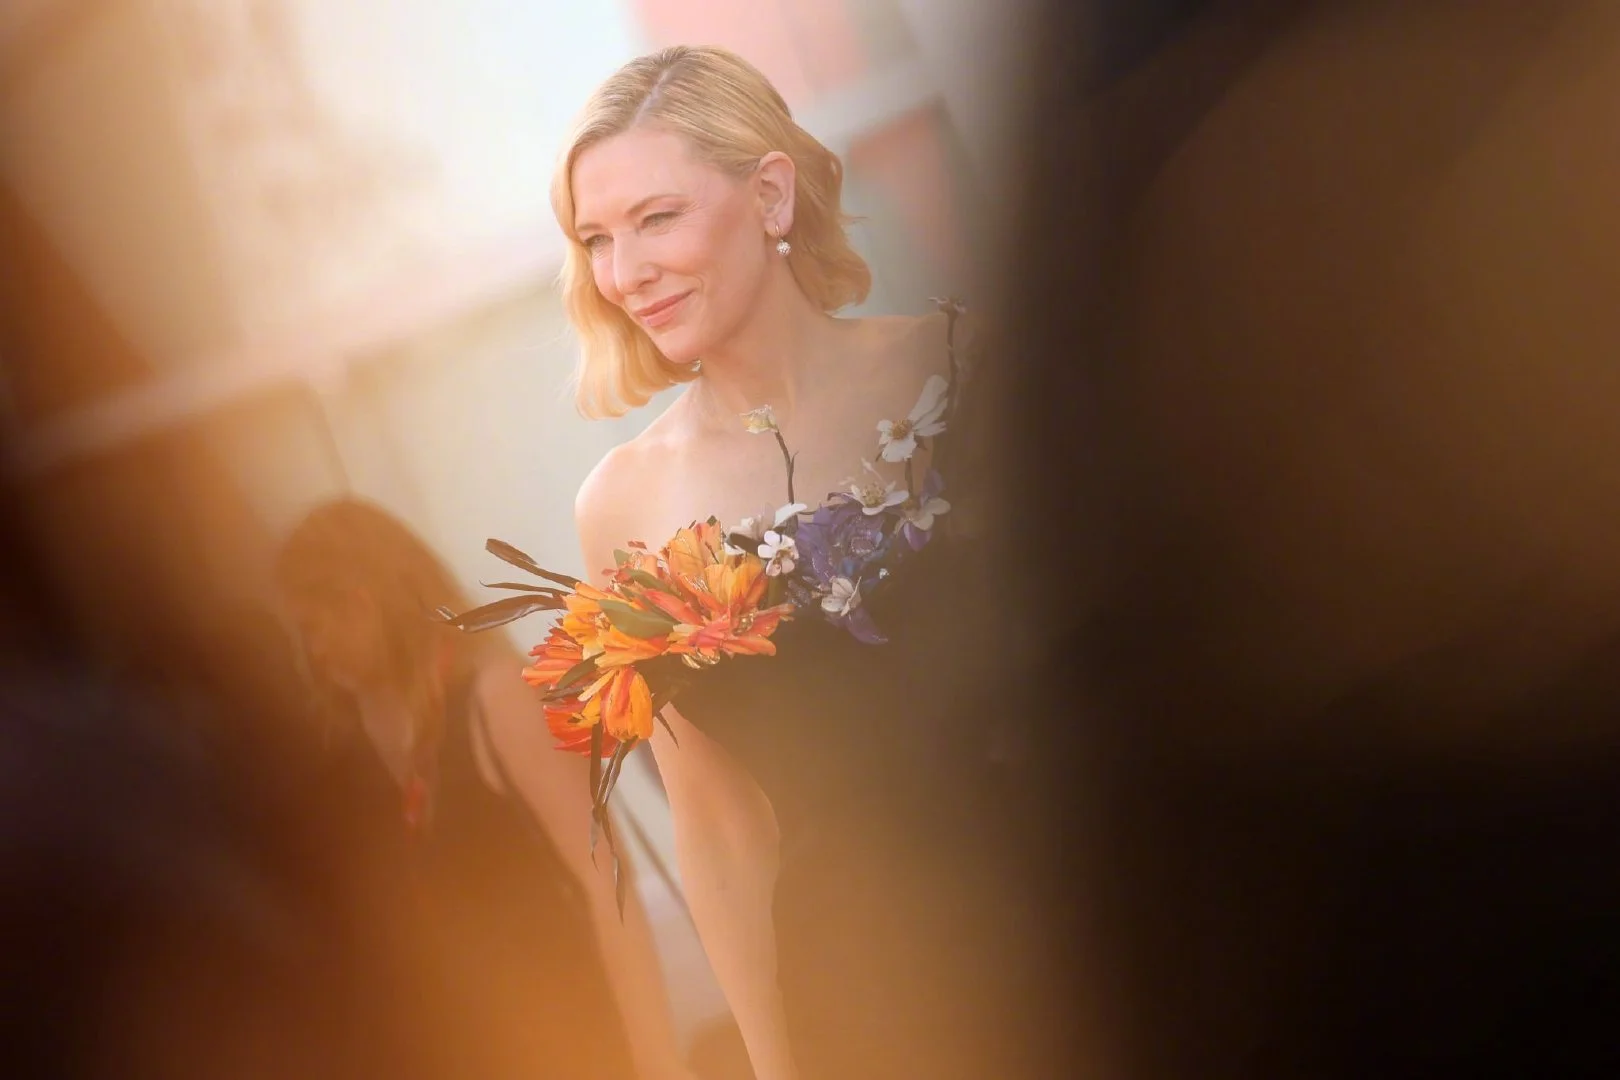 Cate Blanchett attends the premiere of new film 'TÁR‎' at the 79th Venice International Film Festival | FMV6